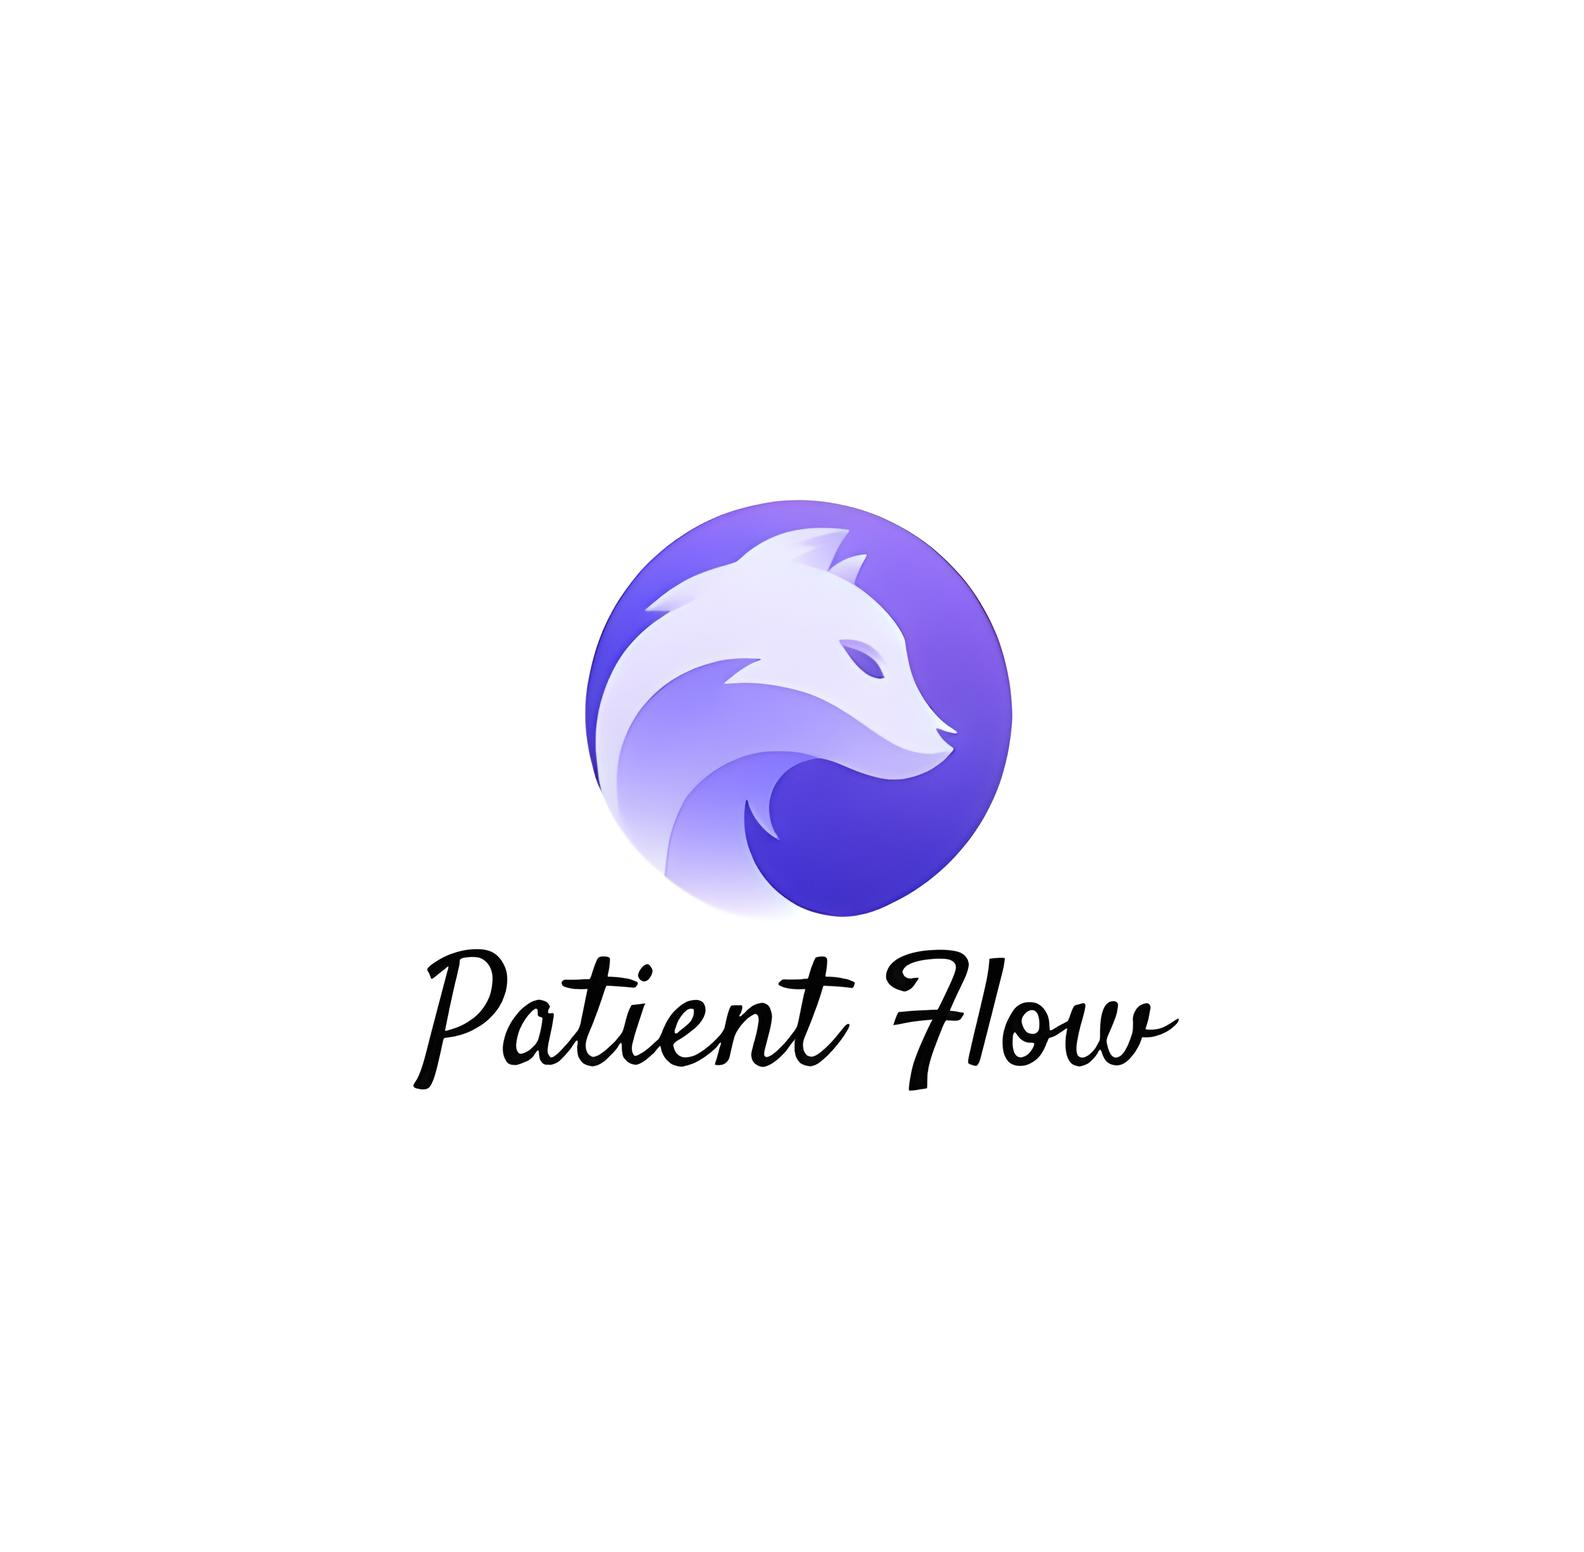 Leading the Charge: Patient Flow’s Role in Driving Dental Industry Innovation